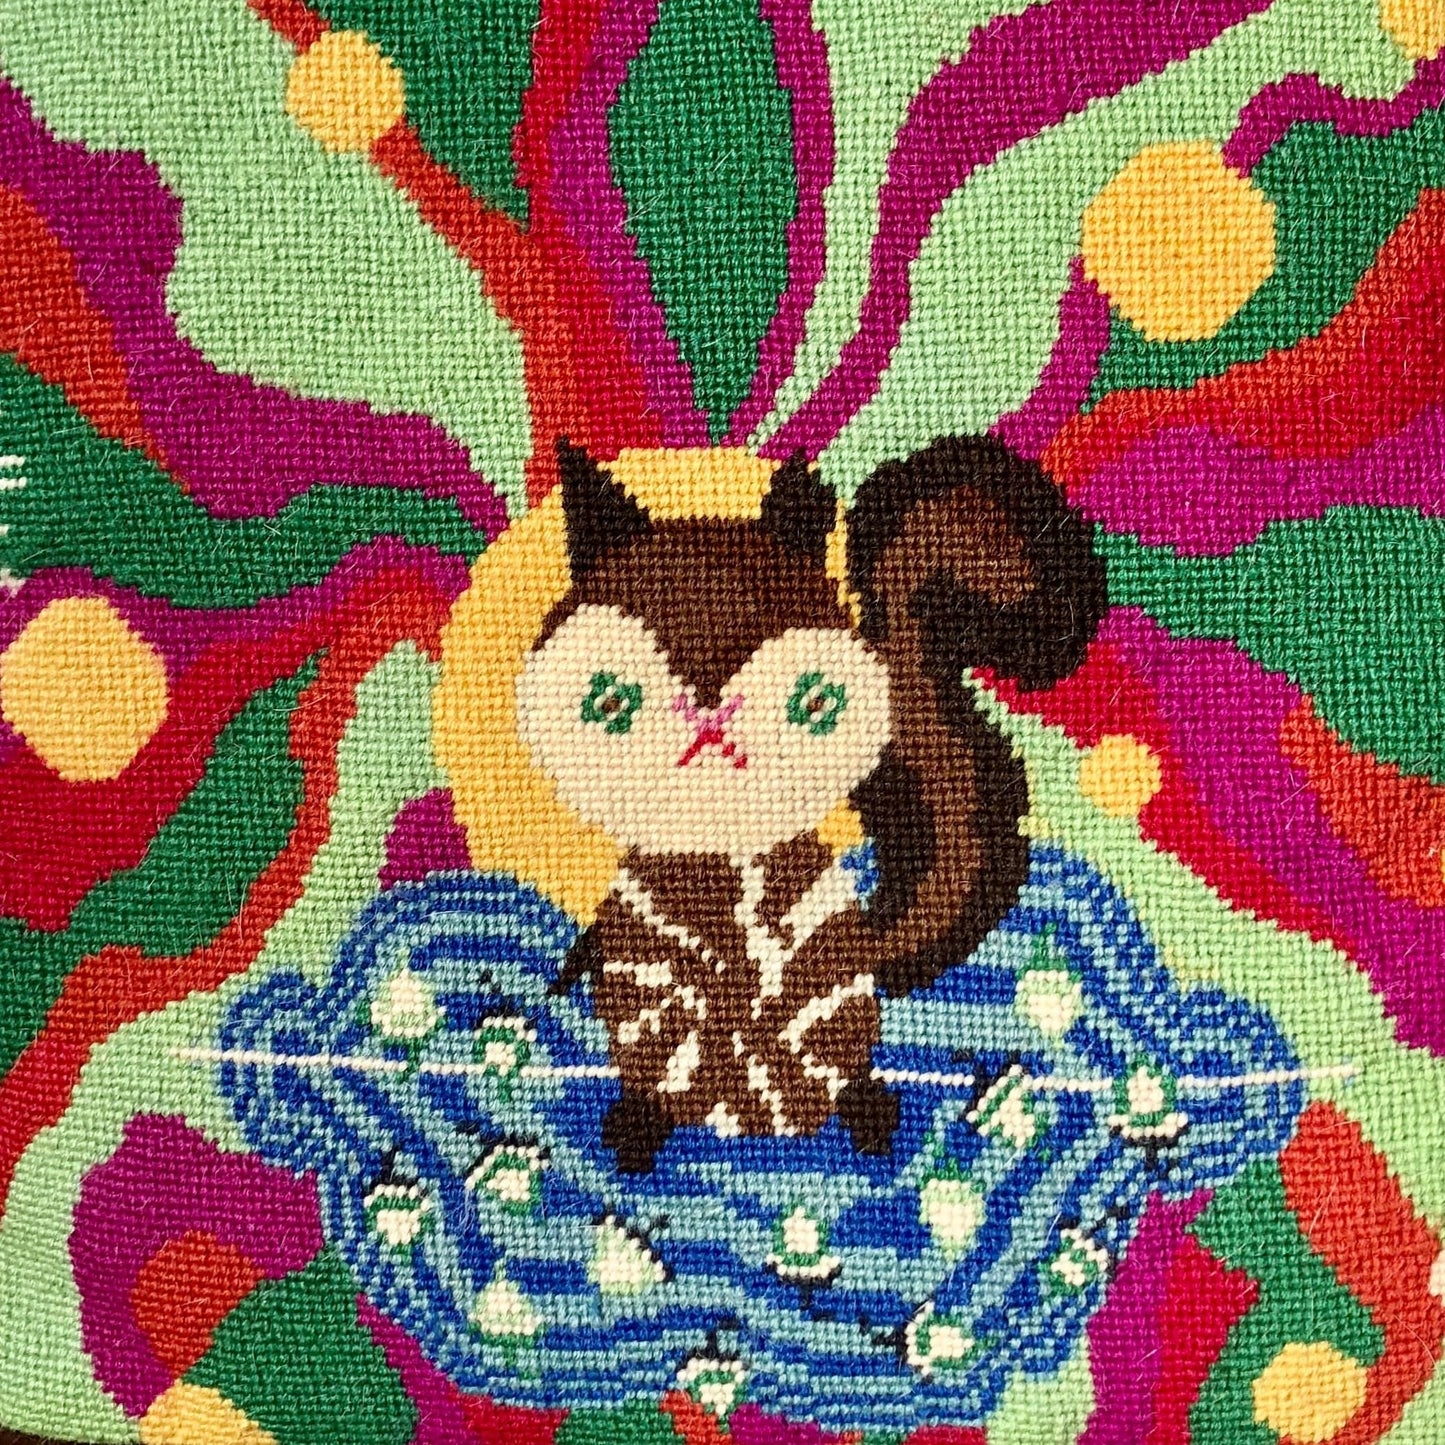 needlepoint PSYCHEDELIC SQUIRREL hand-stitched original pillow